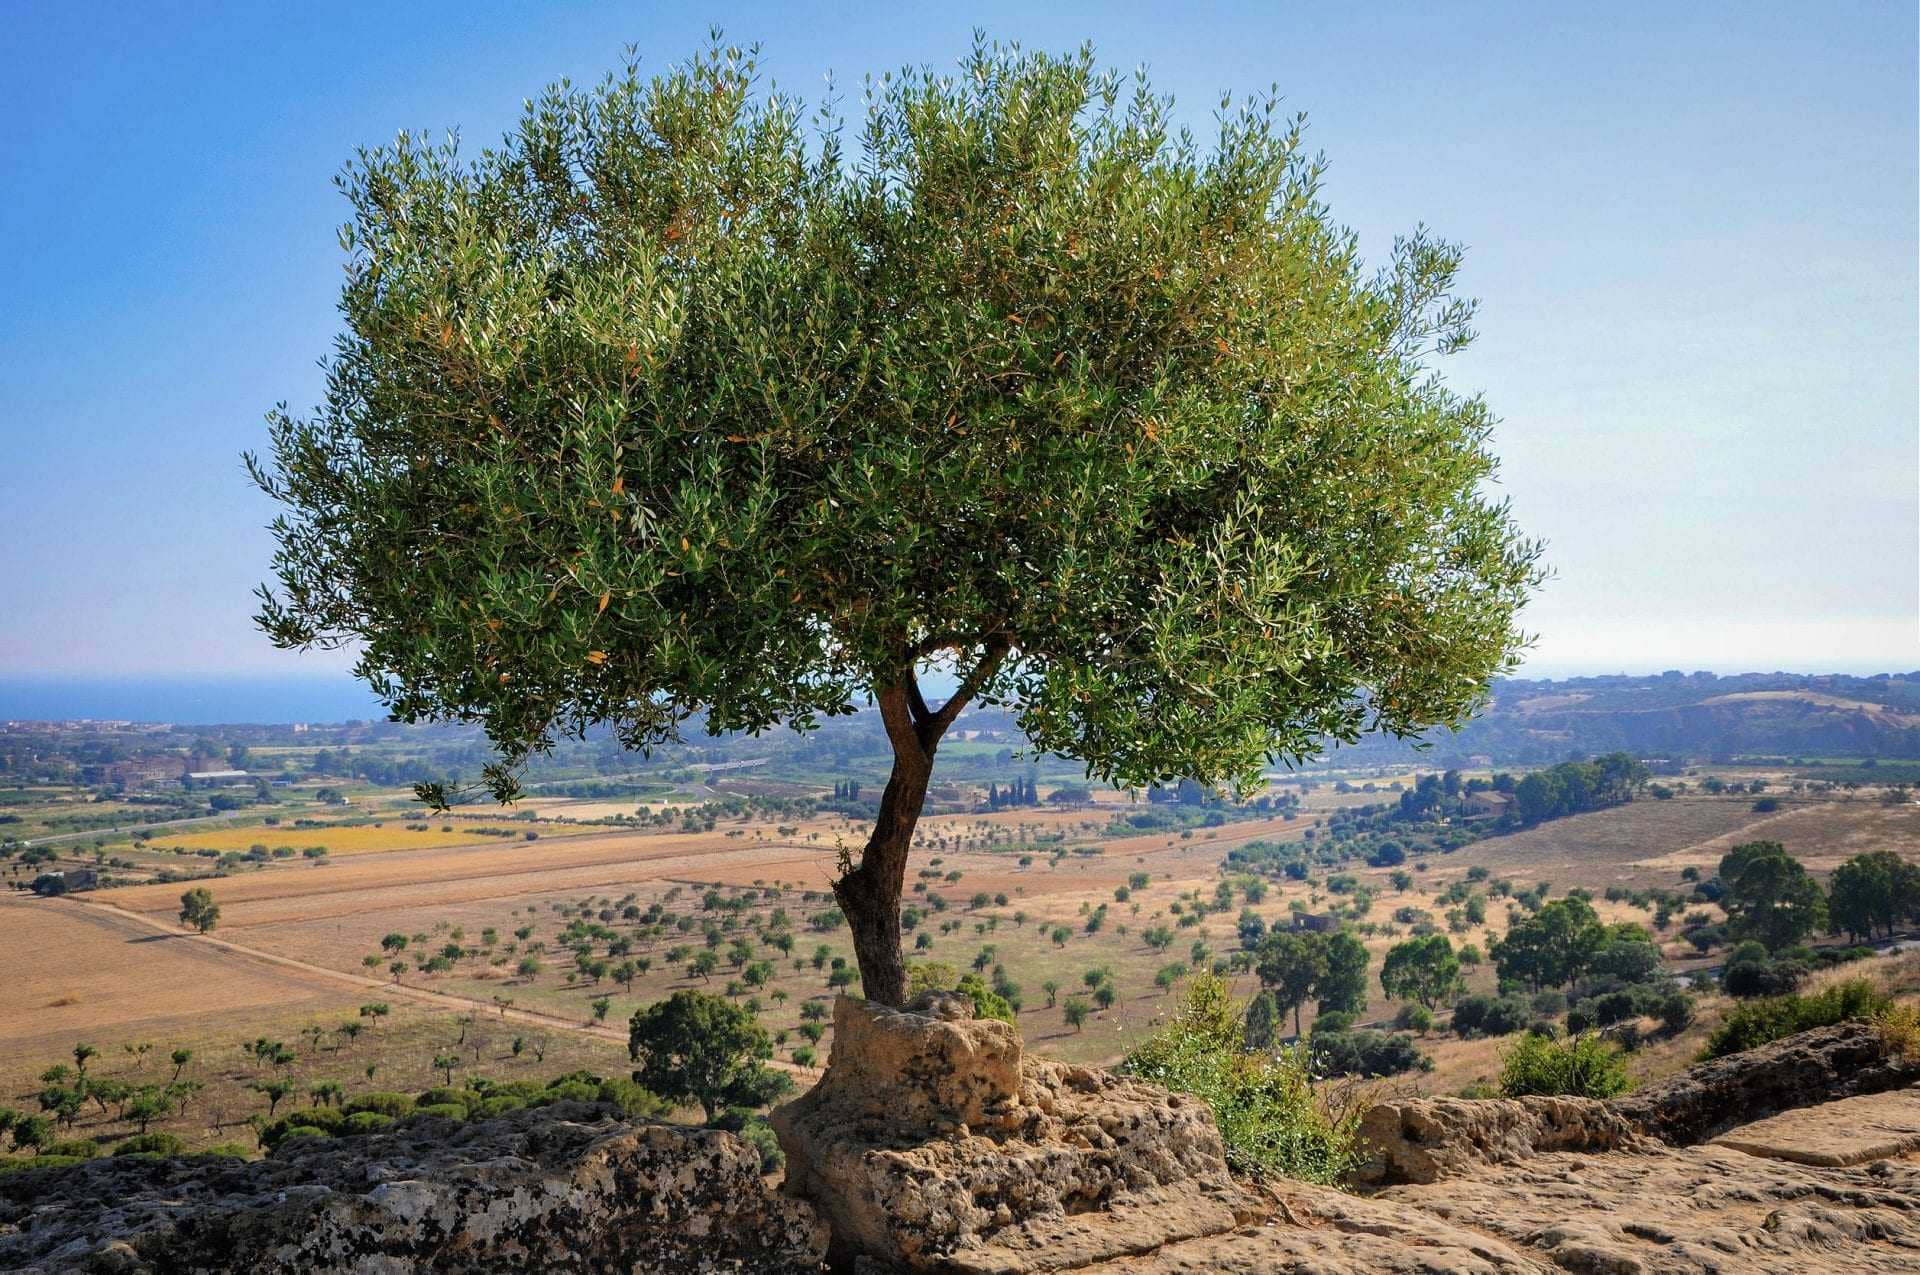 production-world-challenges-await-growers-as-mediterranean-basin-becomes-hotter-and-drier-olive-oil-times